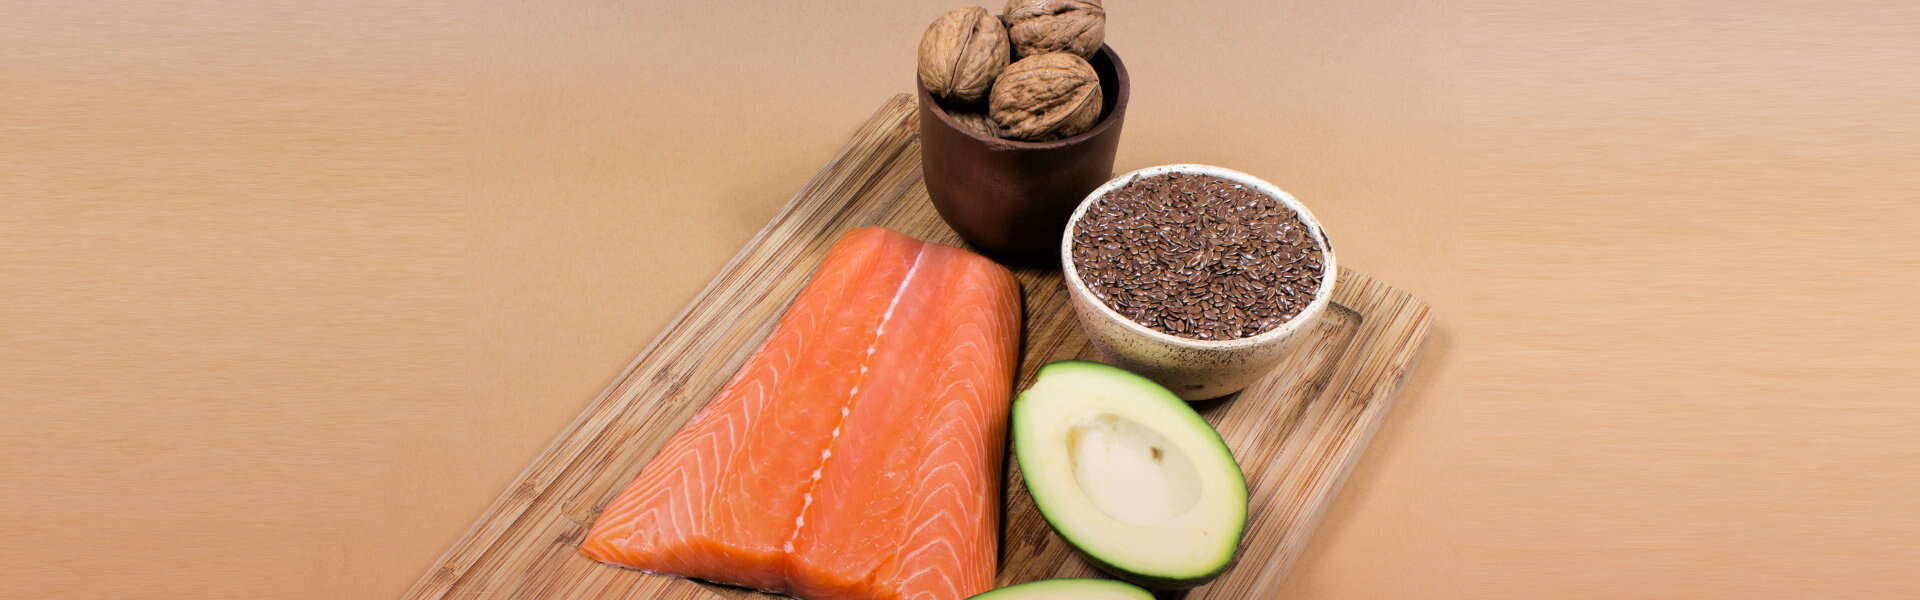 Essential fatty acids: properties and functions